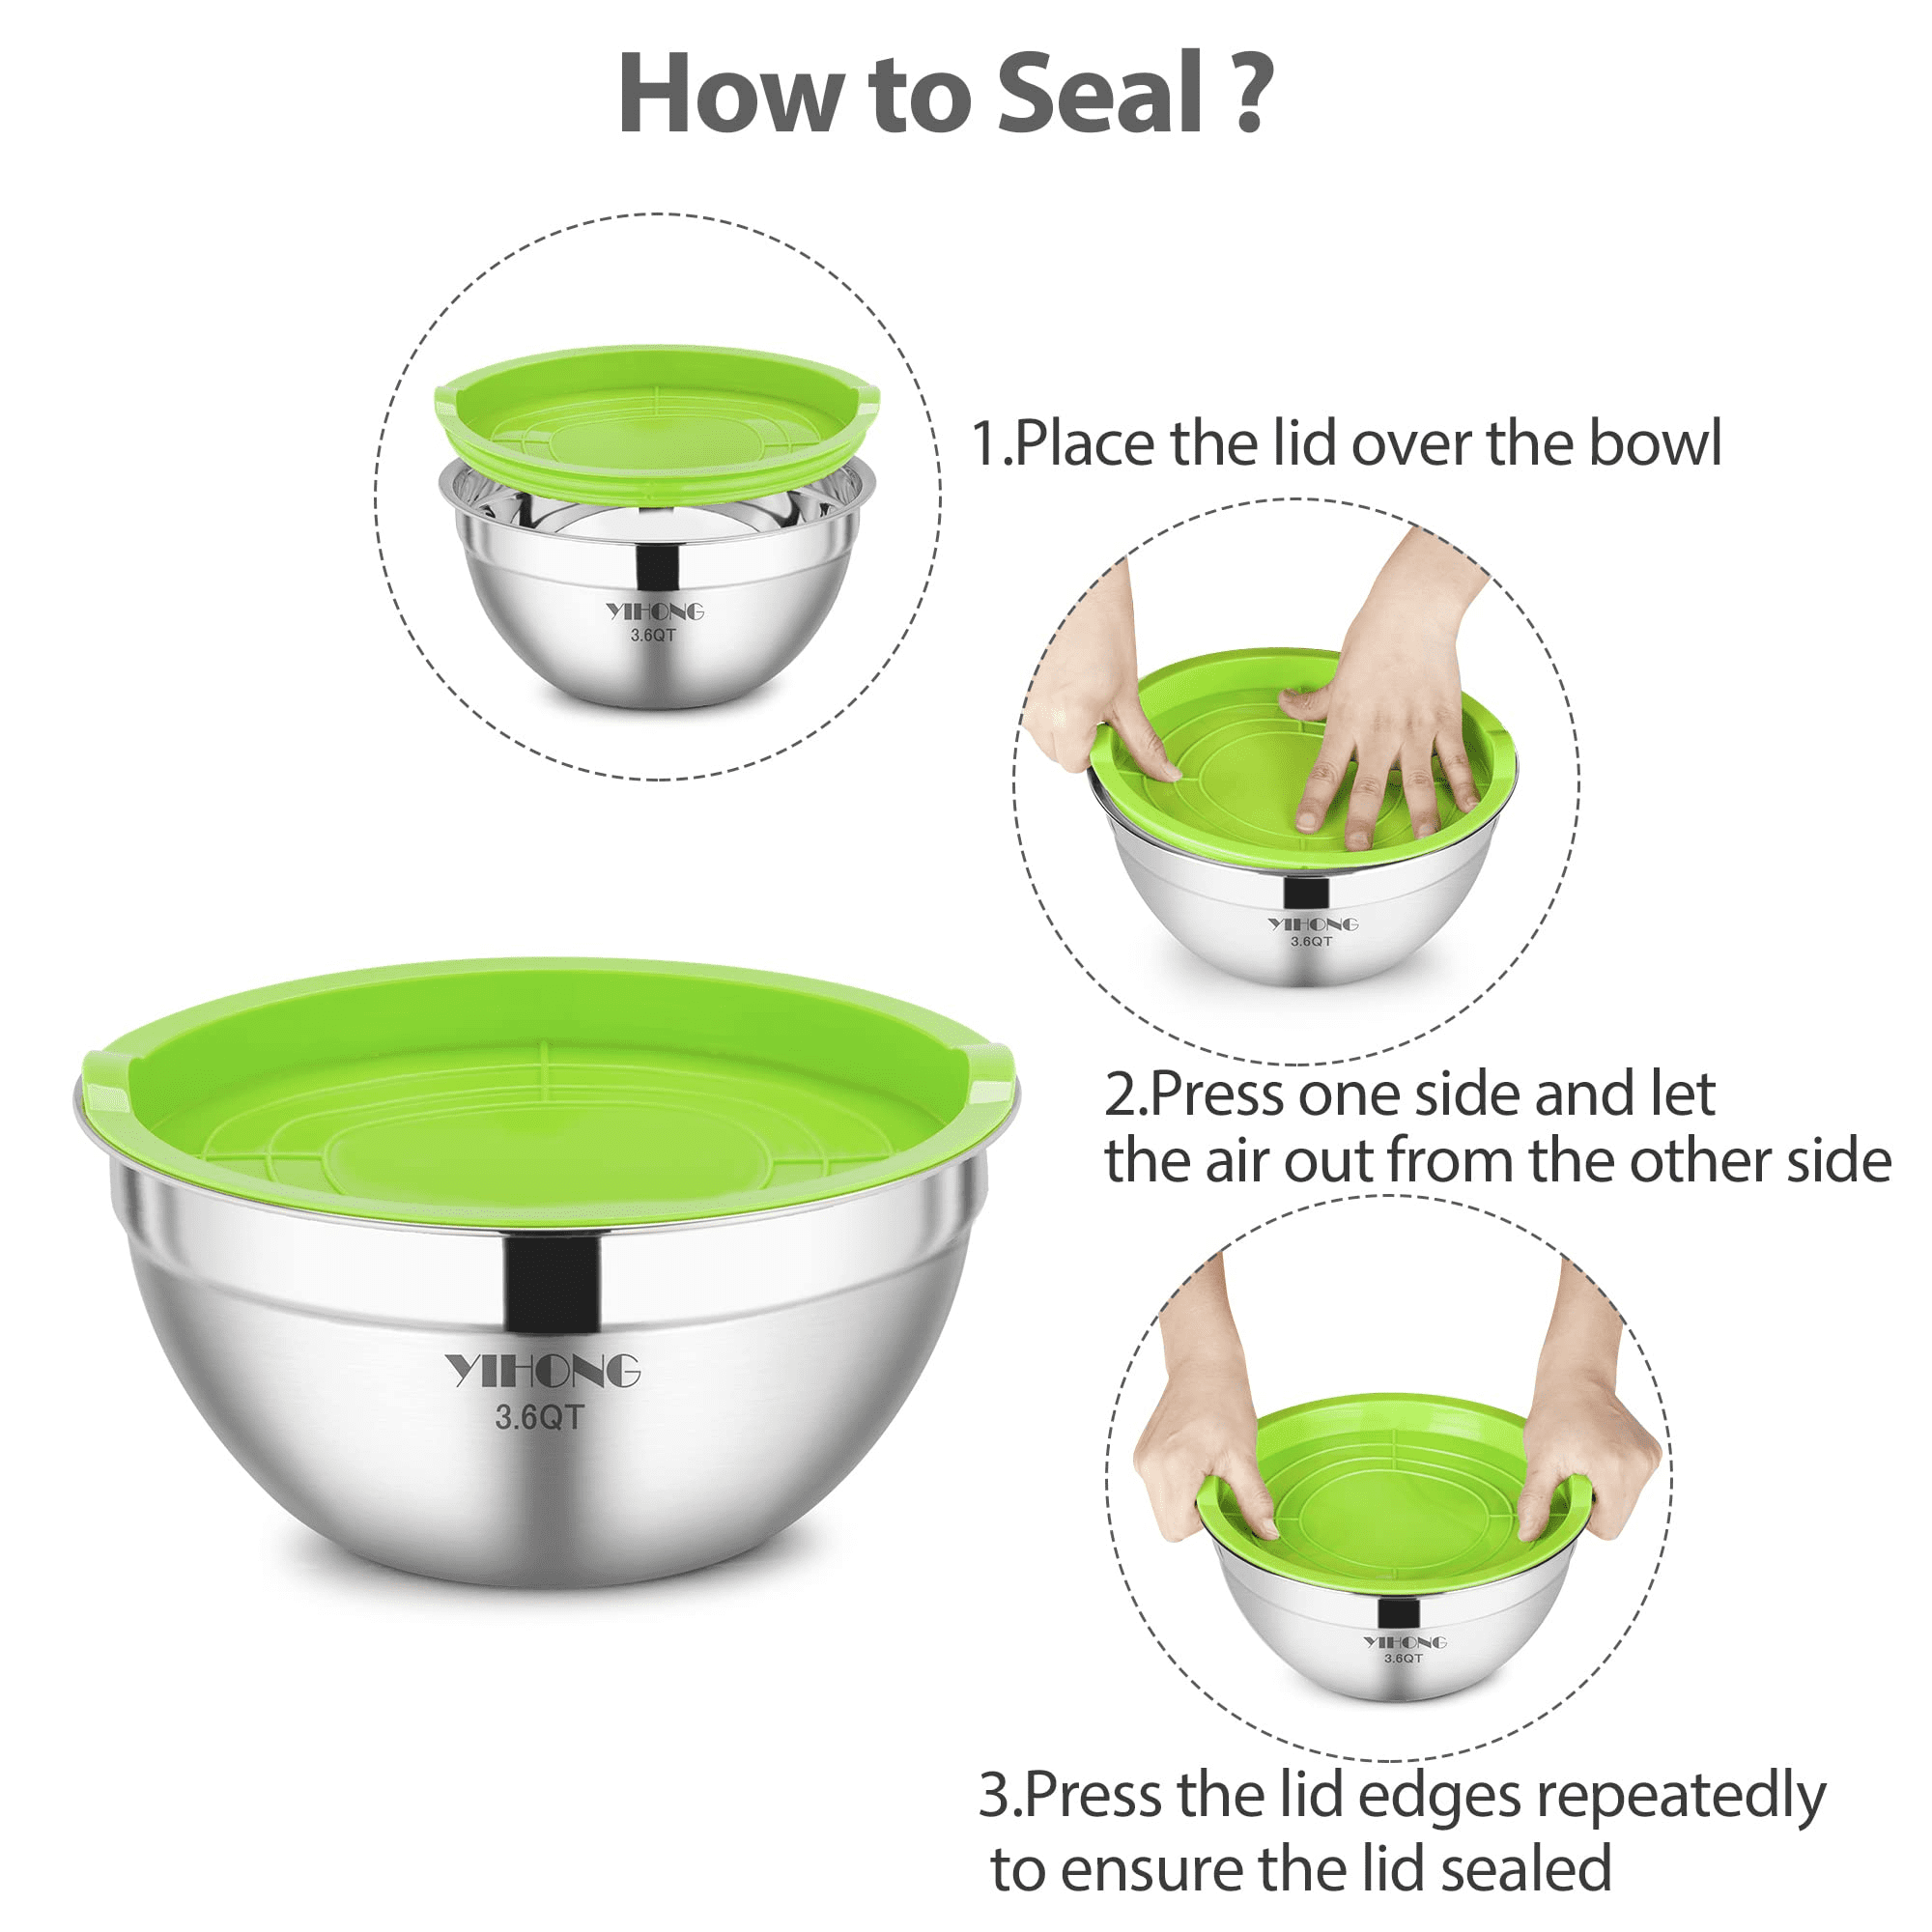 Oversized All-Purpose Stainless Steel Bowl for Home & Commercial, 16 Qt, 15  L, Made in Korea, Premium Stainless Steel, No Dulling & Rusting, For